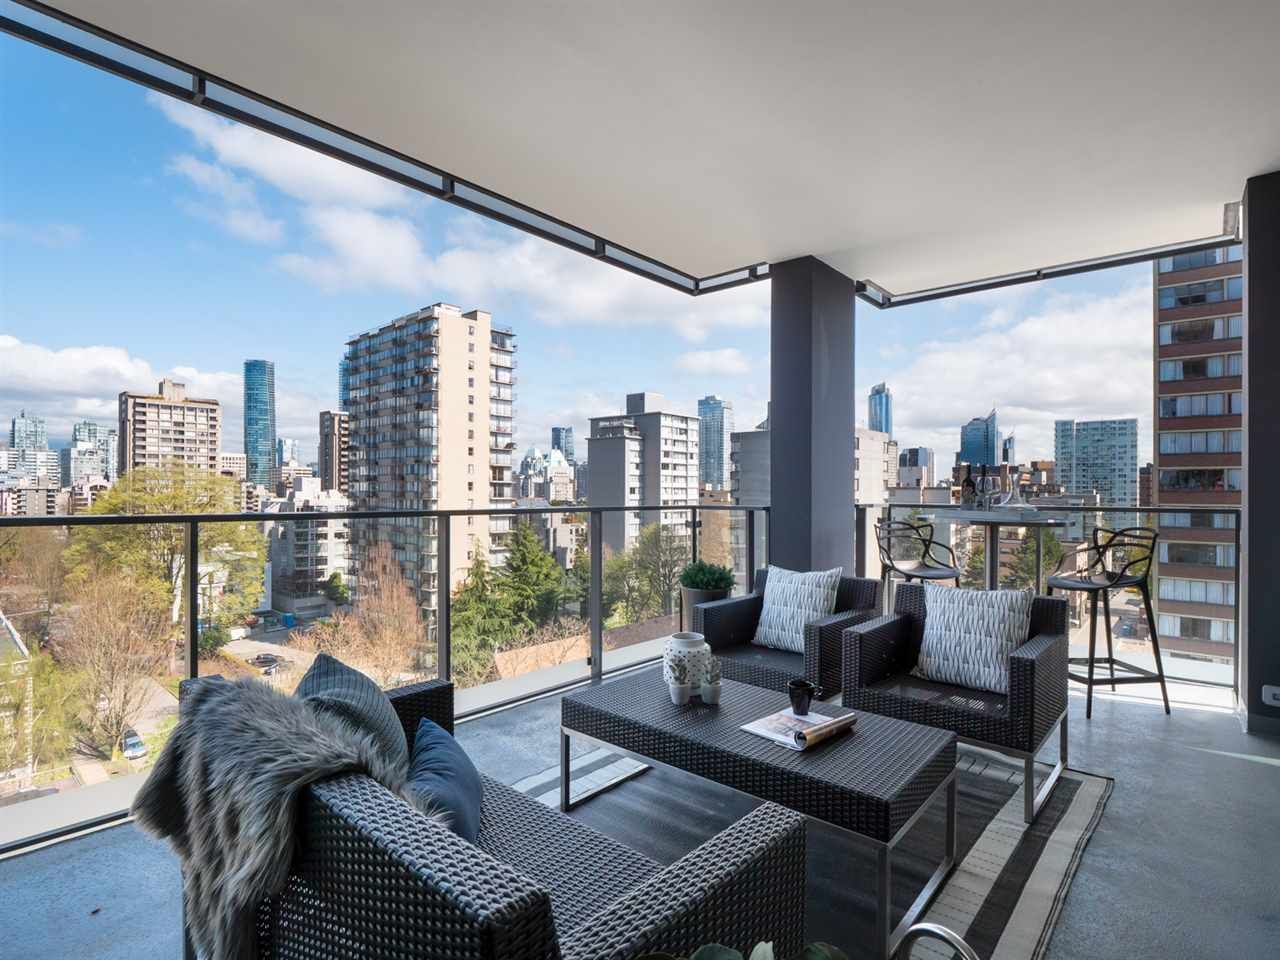 Main Photo: 1001 1171 JERVIS STREET in Vancouver: West End VW Condo for sale (Vancouver West)  : MLS®# R2383389